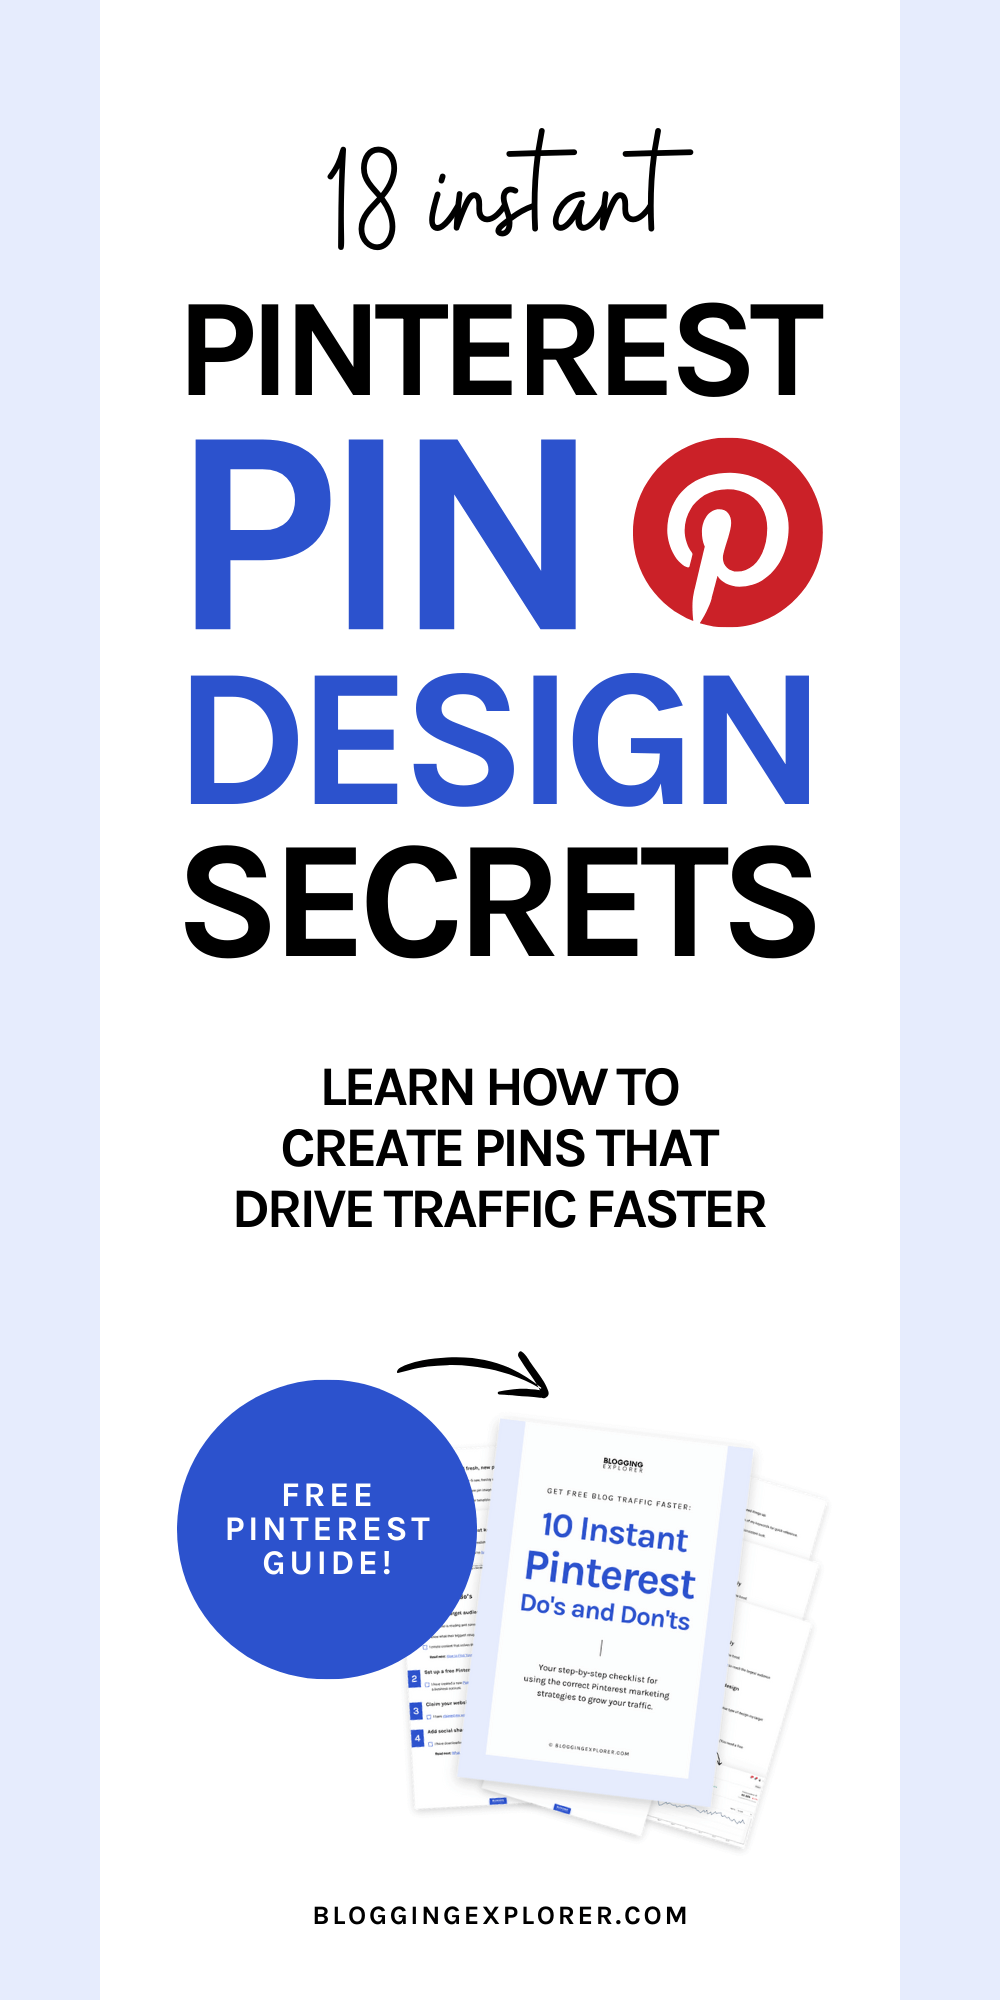 Pinterest pin design guide - How to create pins that drive traffic faster